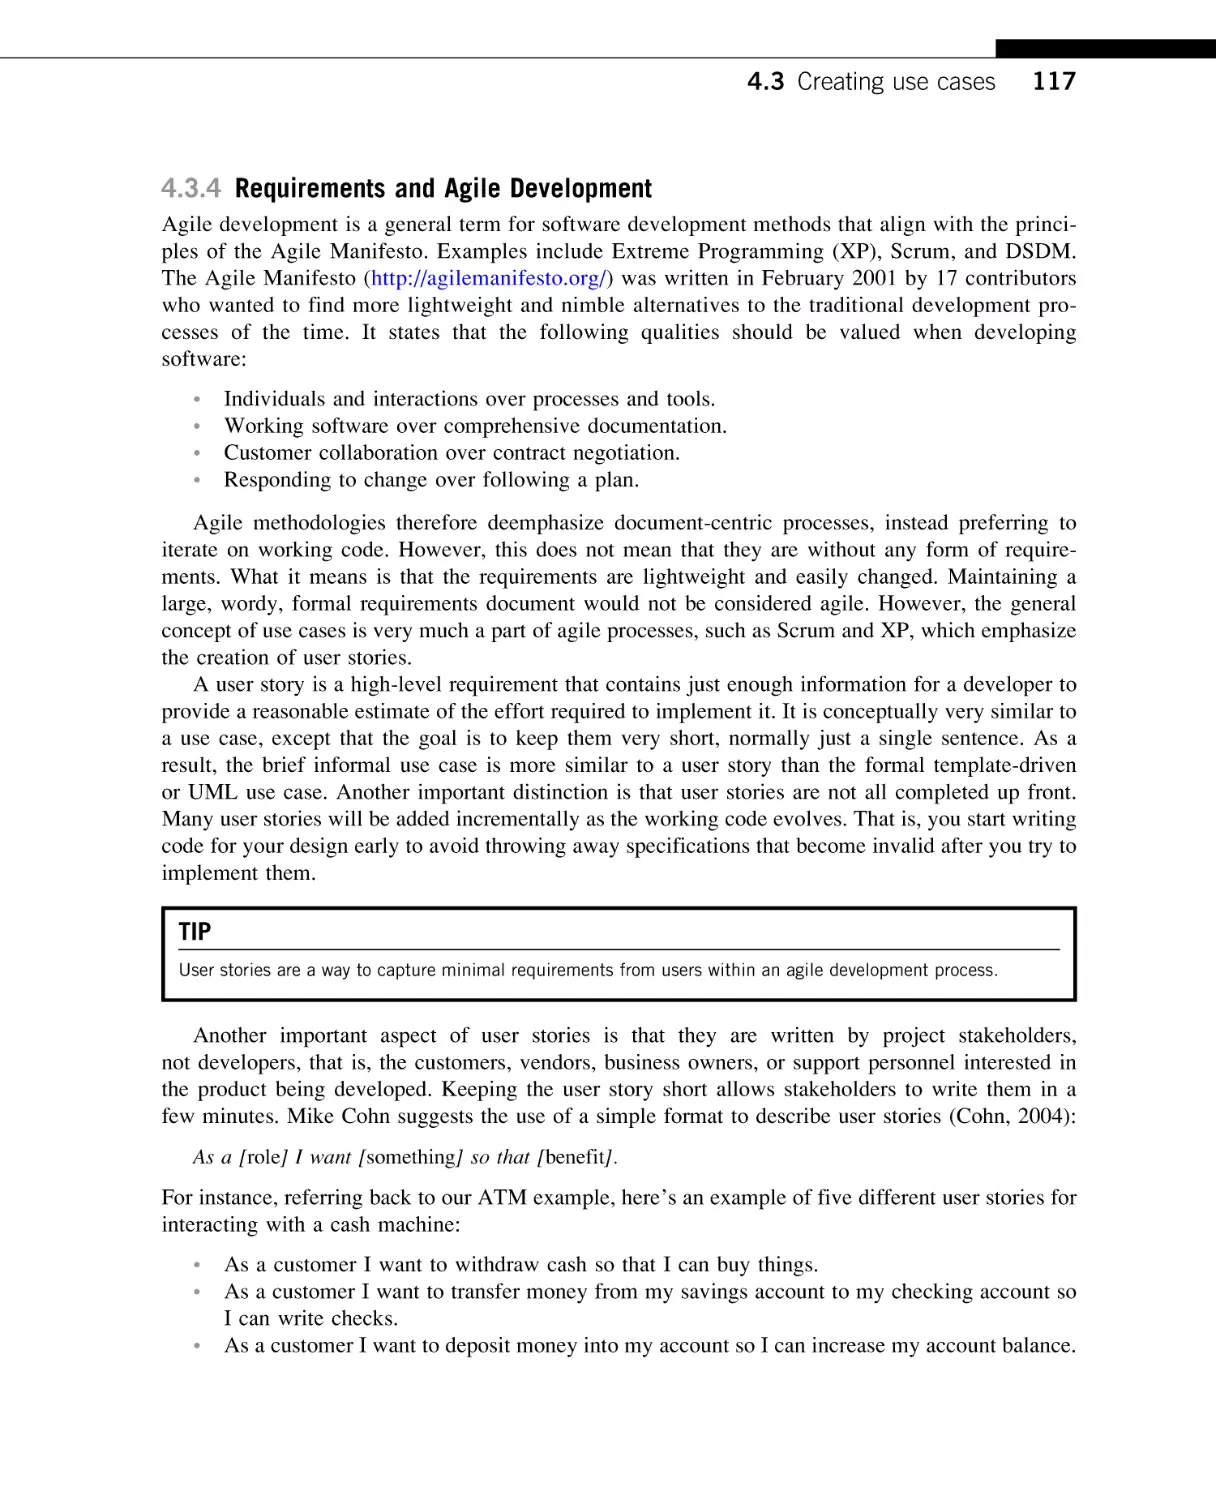 Requirements and Agile Development